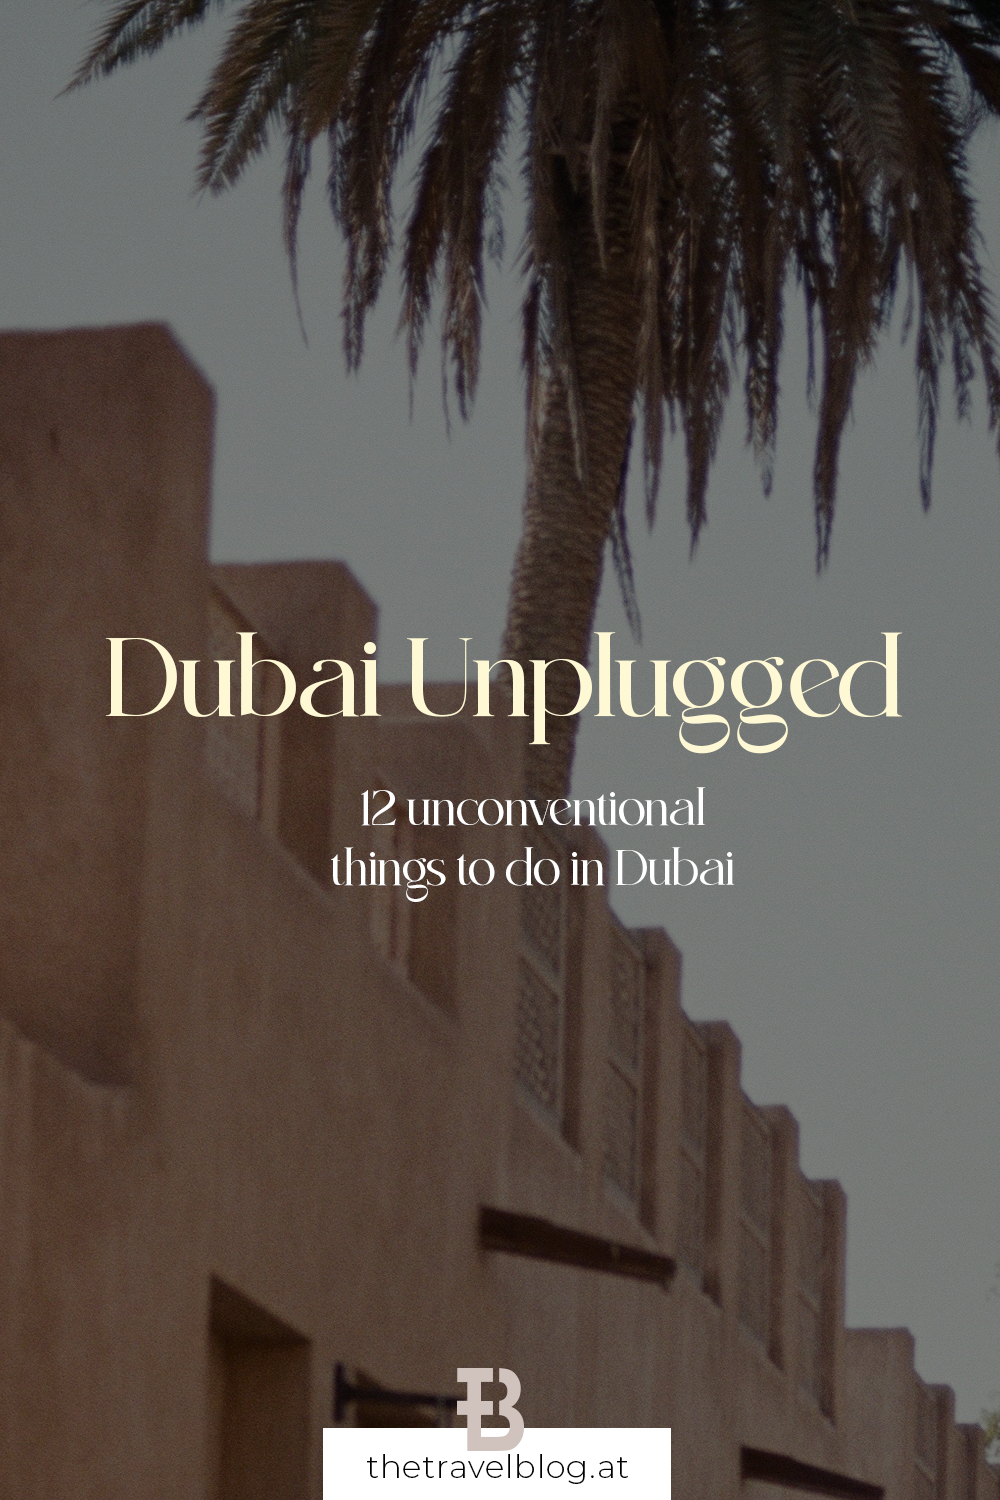 Dubai Unplugged: 12 unconventional things to do in Dubai